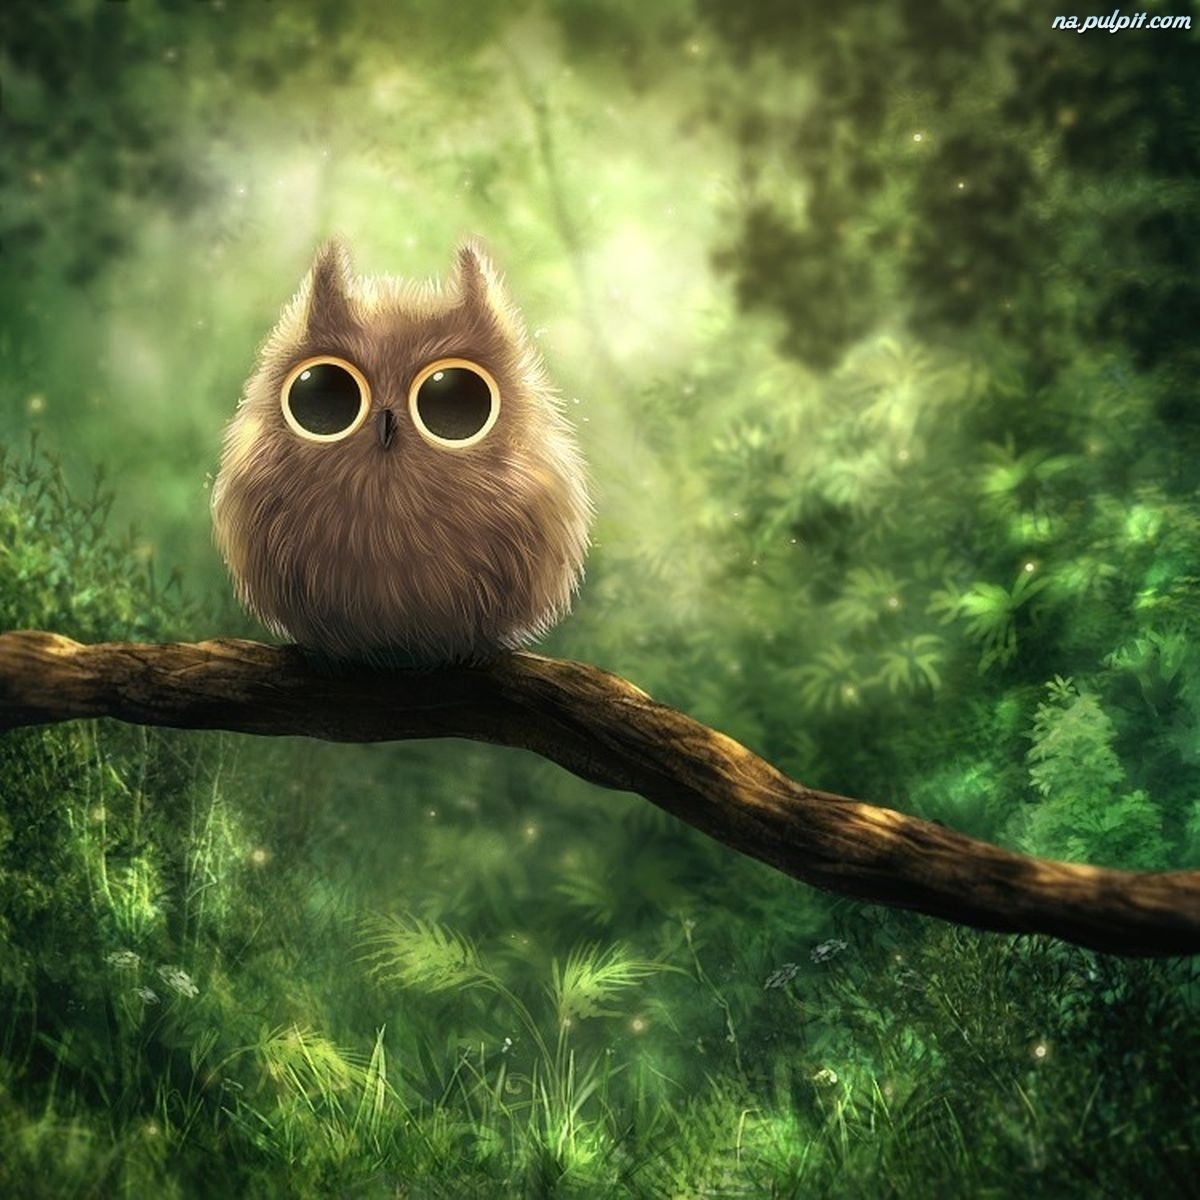 pictures, owl, birds, green High Definition image